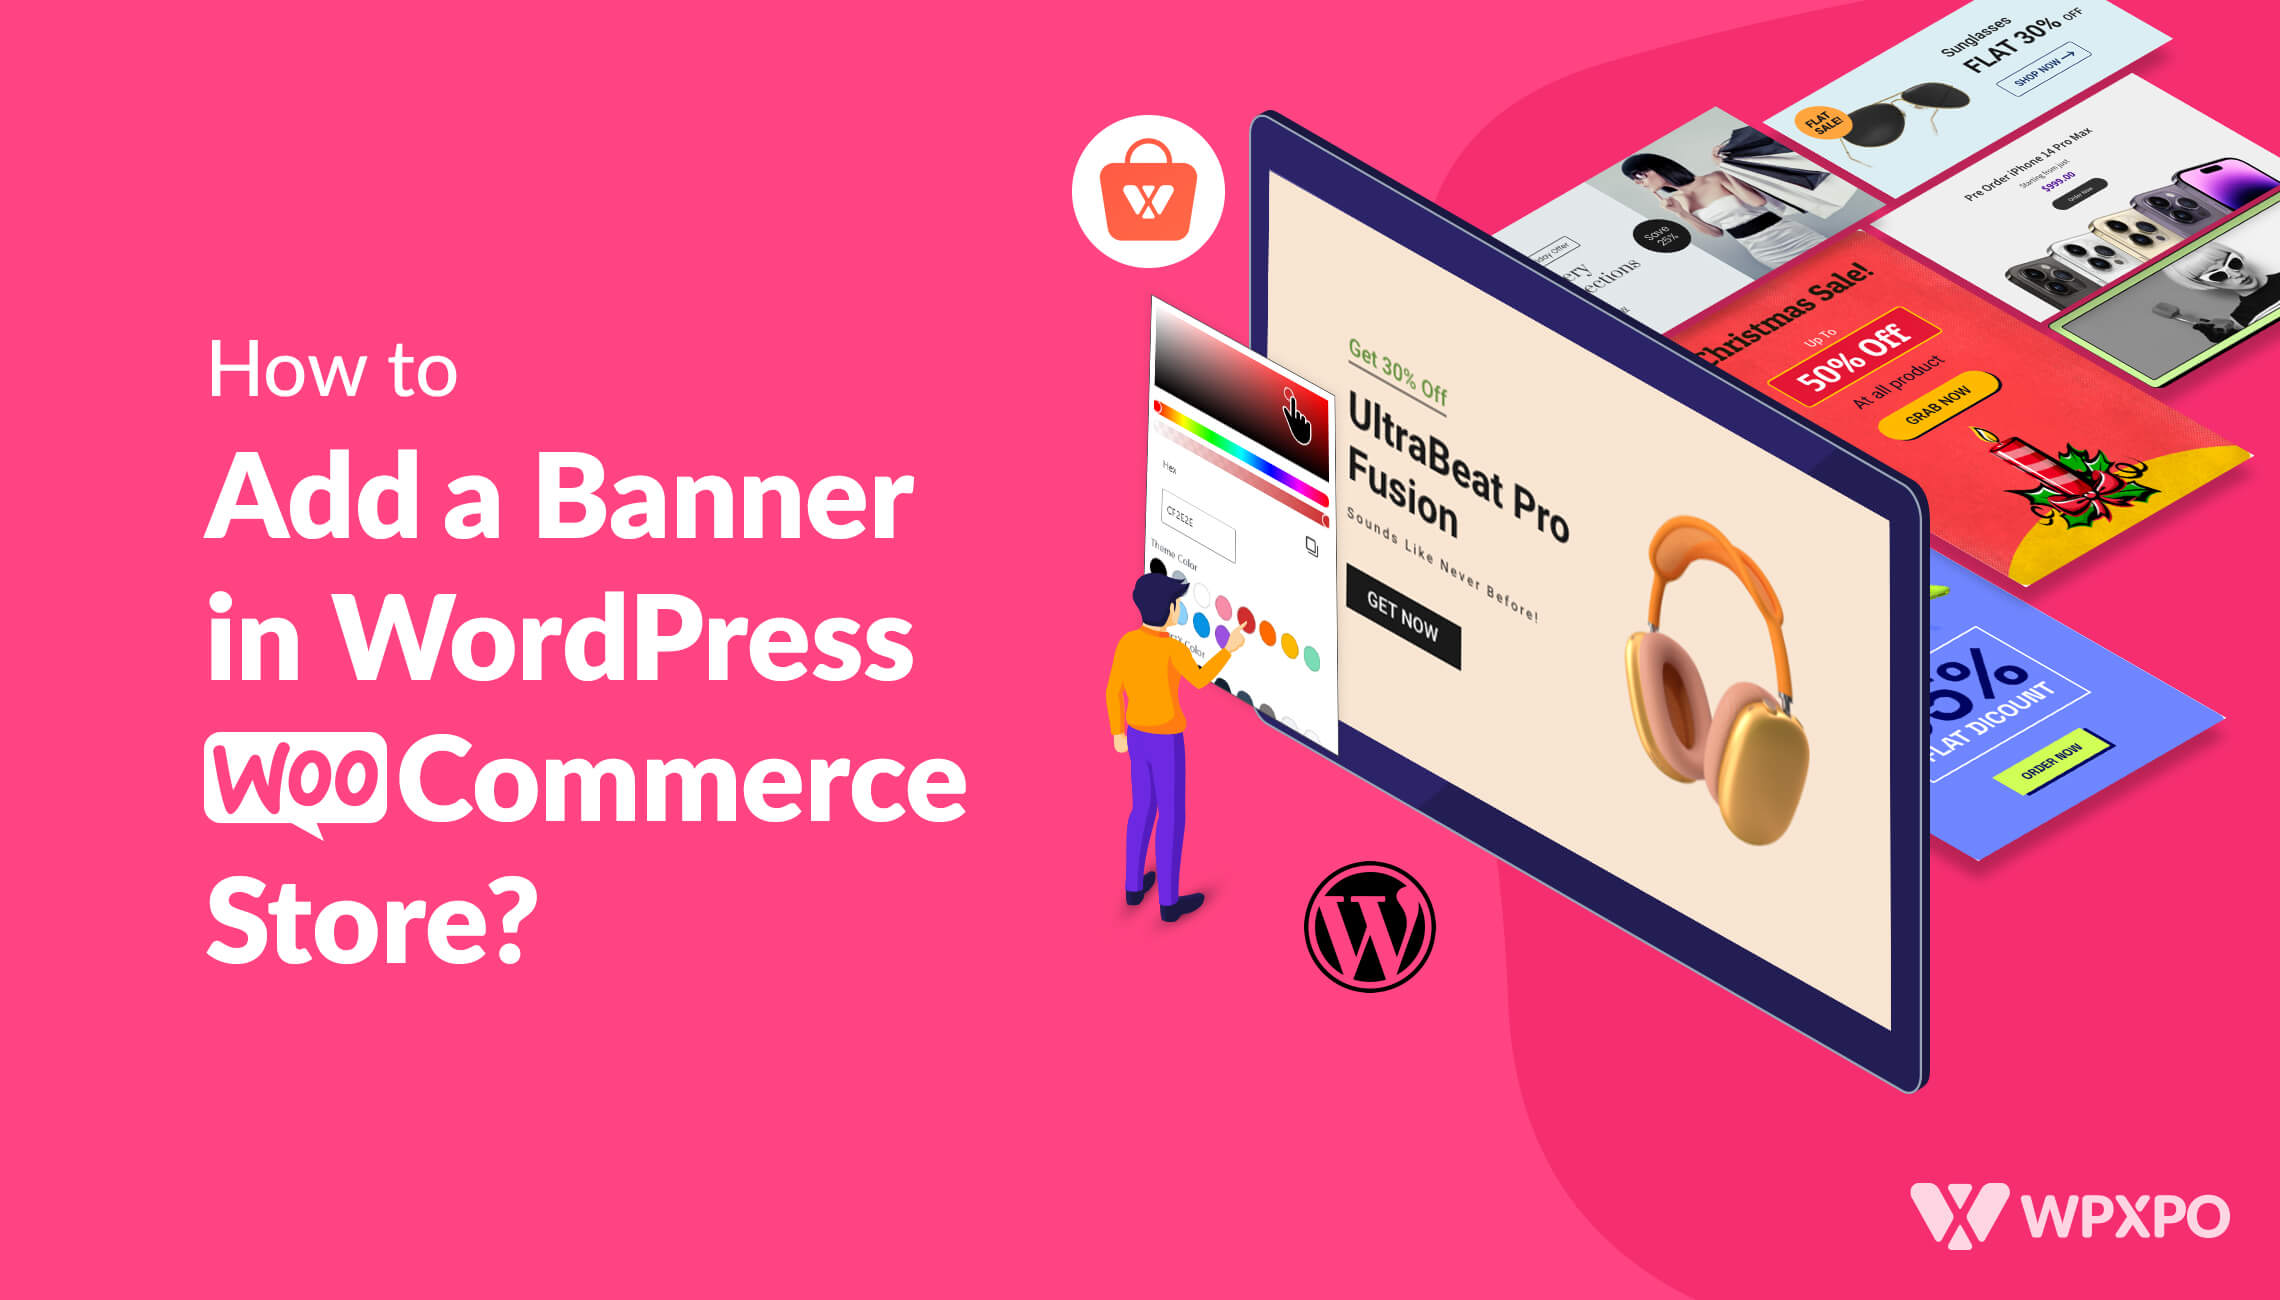 How to Add a Banner in WordPress WooCommerce Store? [with ProductX!]